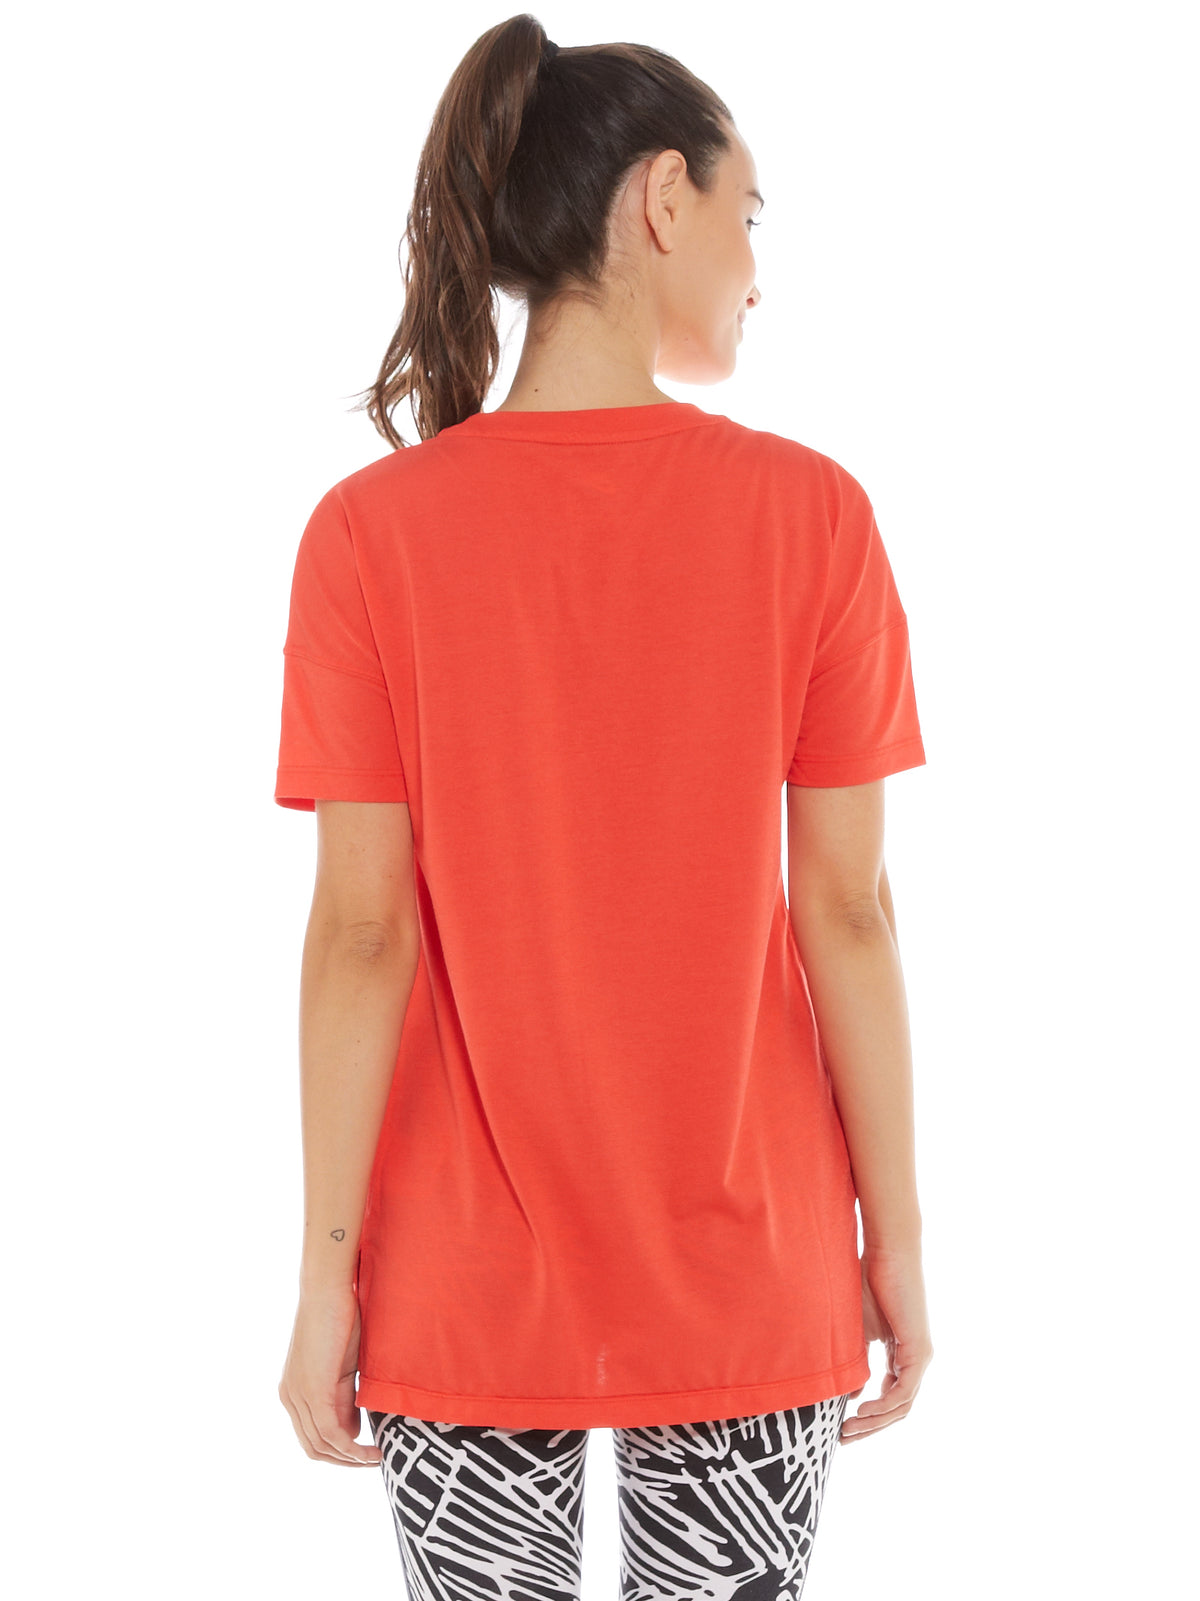 Signal Tee in Red